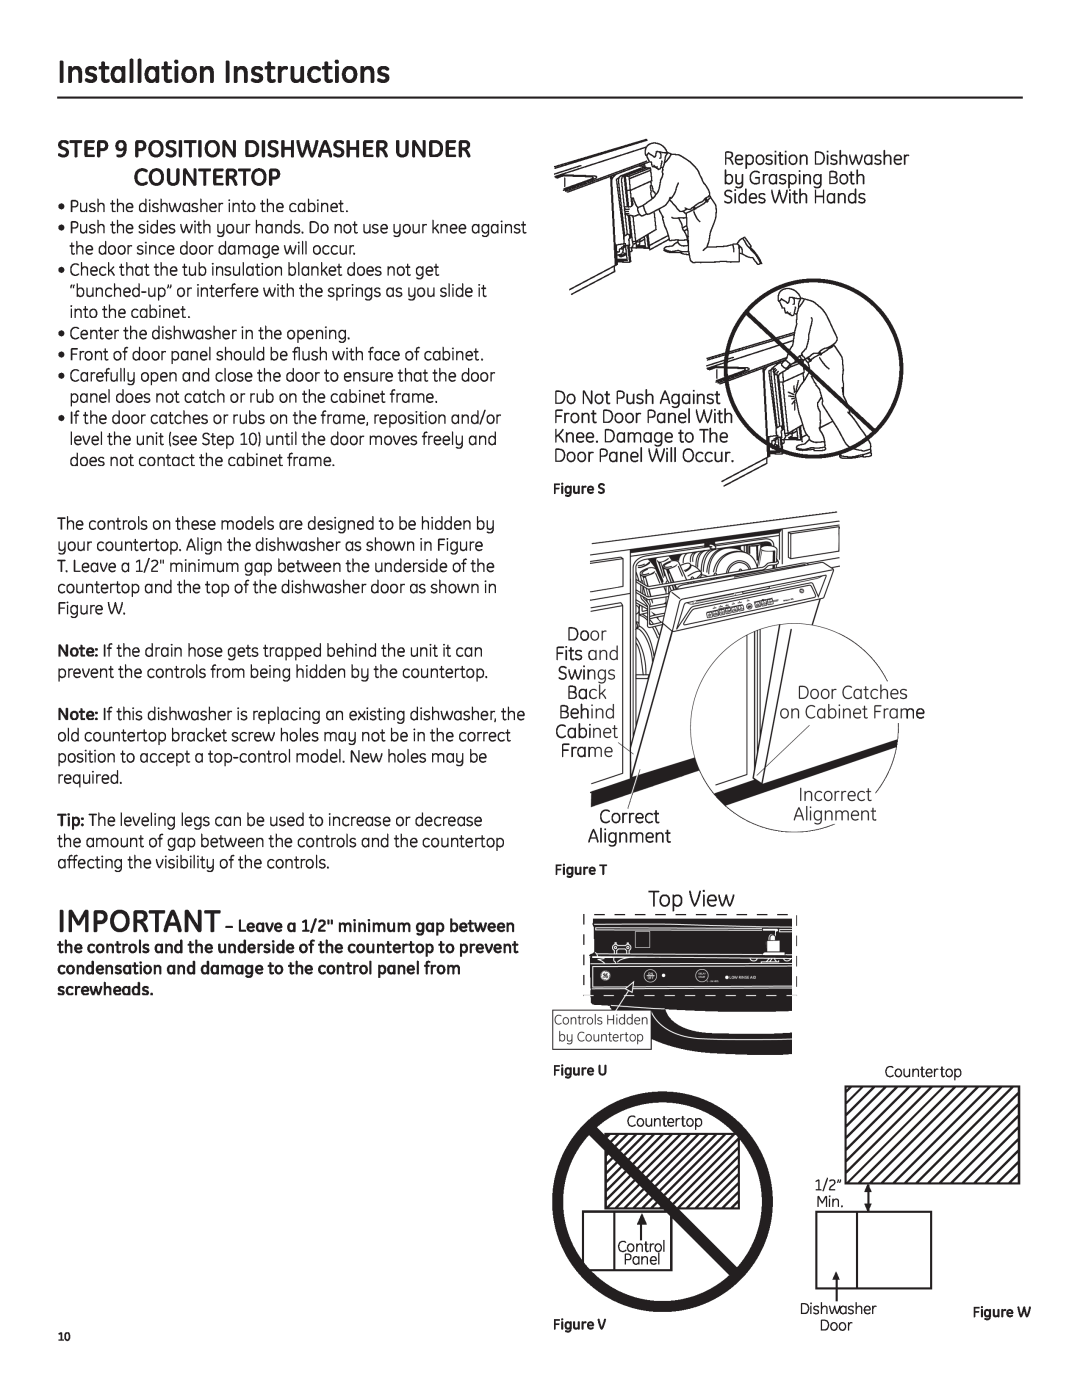 GE ZBD1870NSS installation instructions Position Dishwasher Under Countertop, Installation Instructions, Top View 